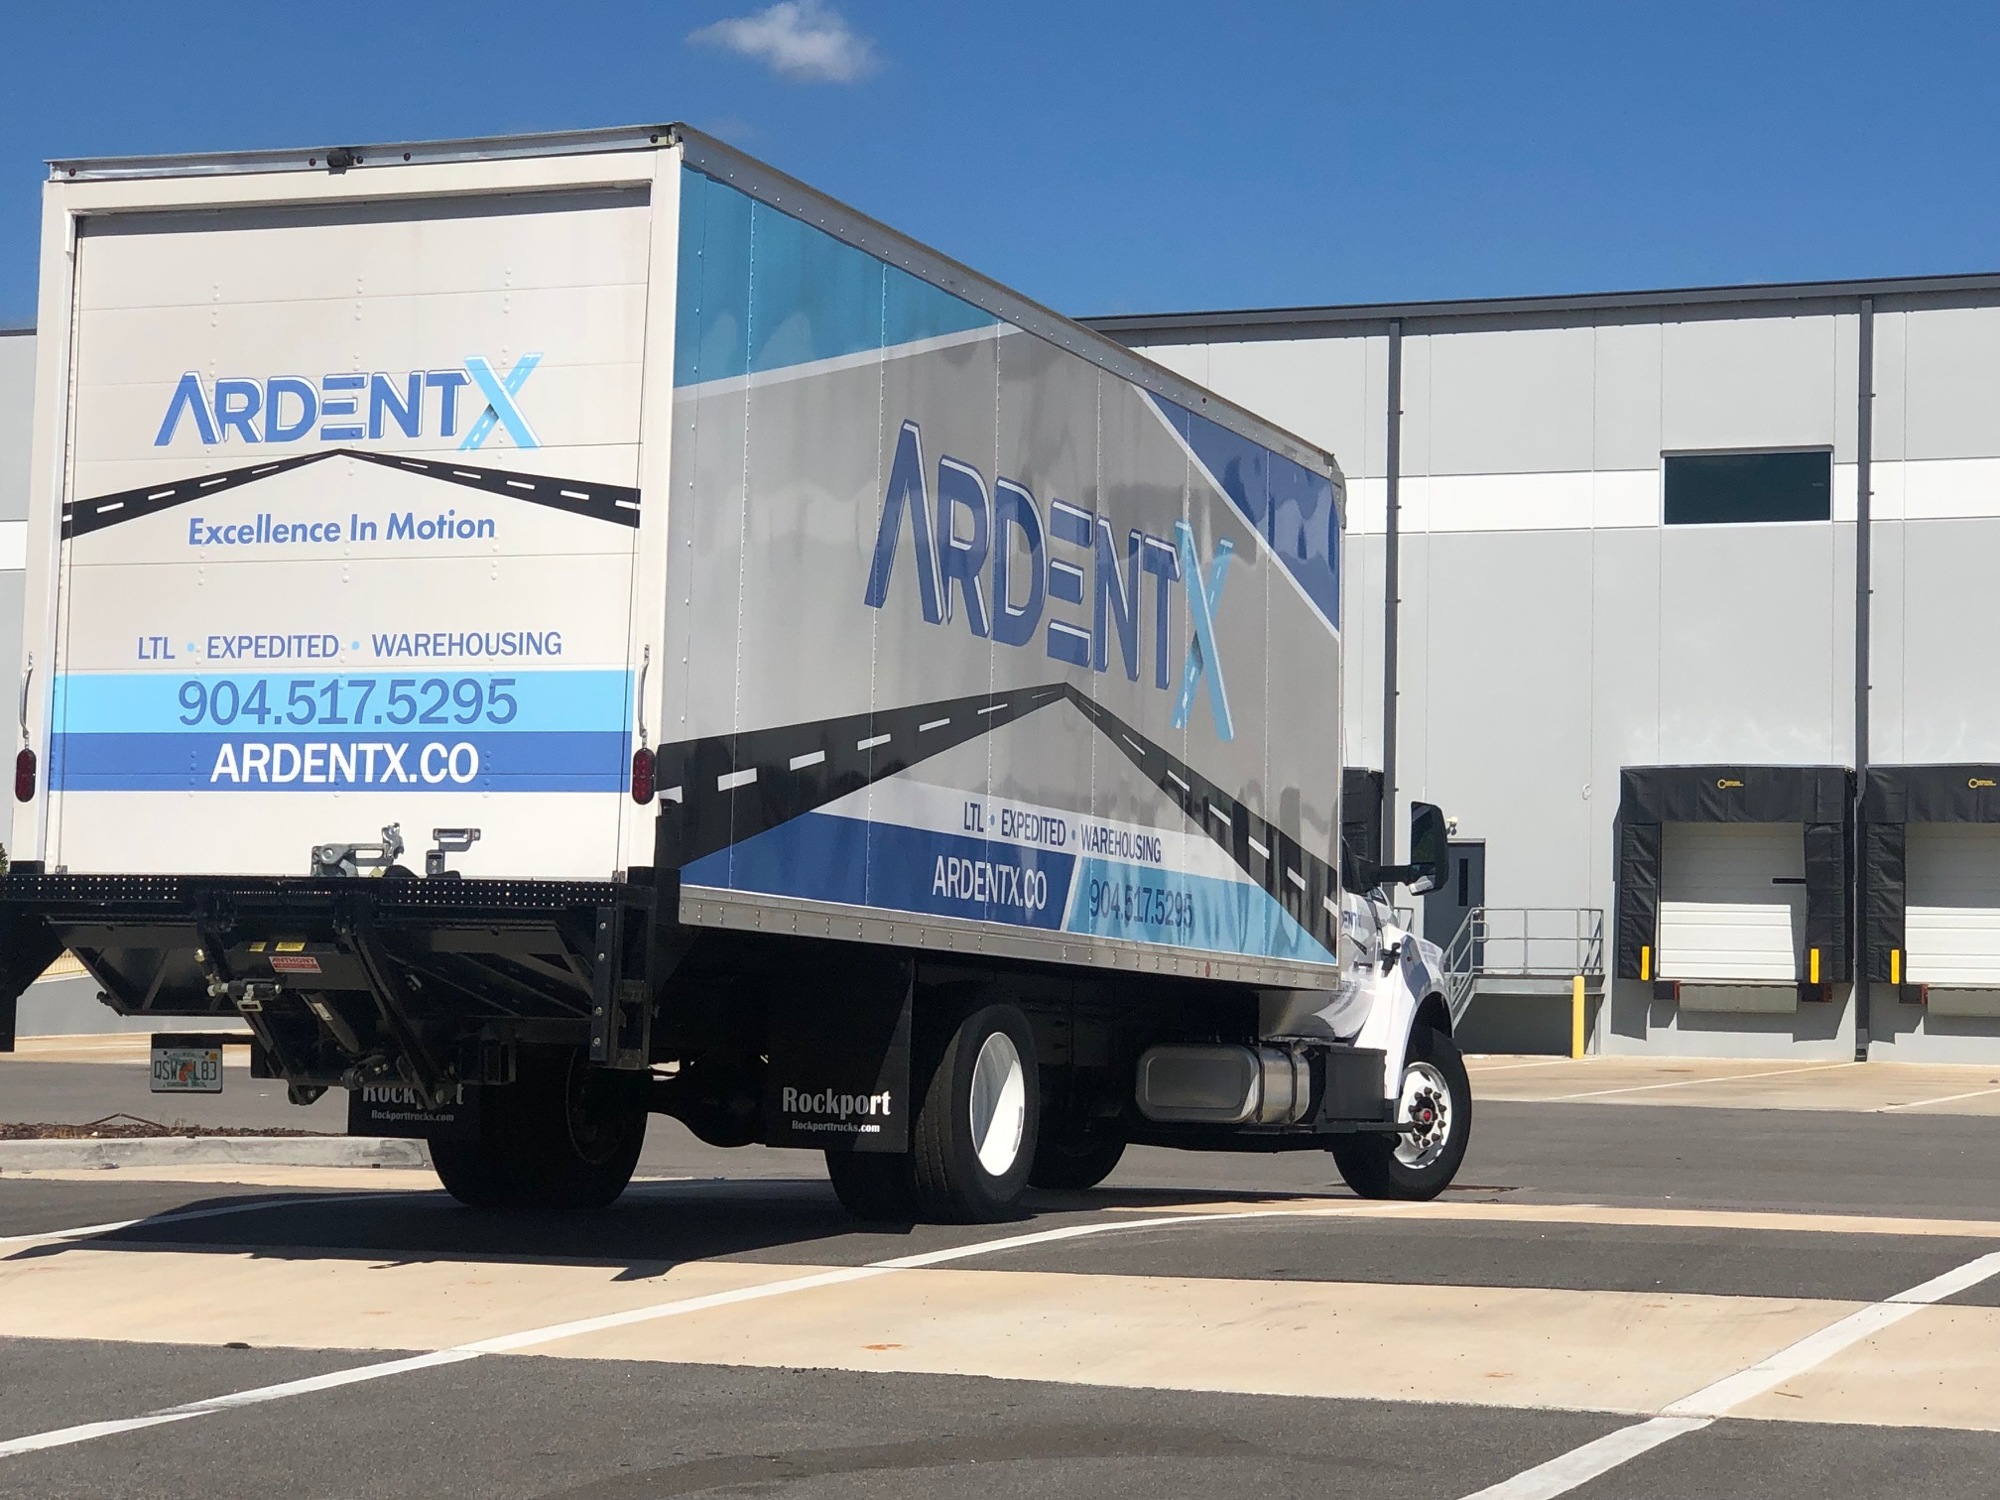 ArdentX also owns a box truck and wants to have one or two more.